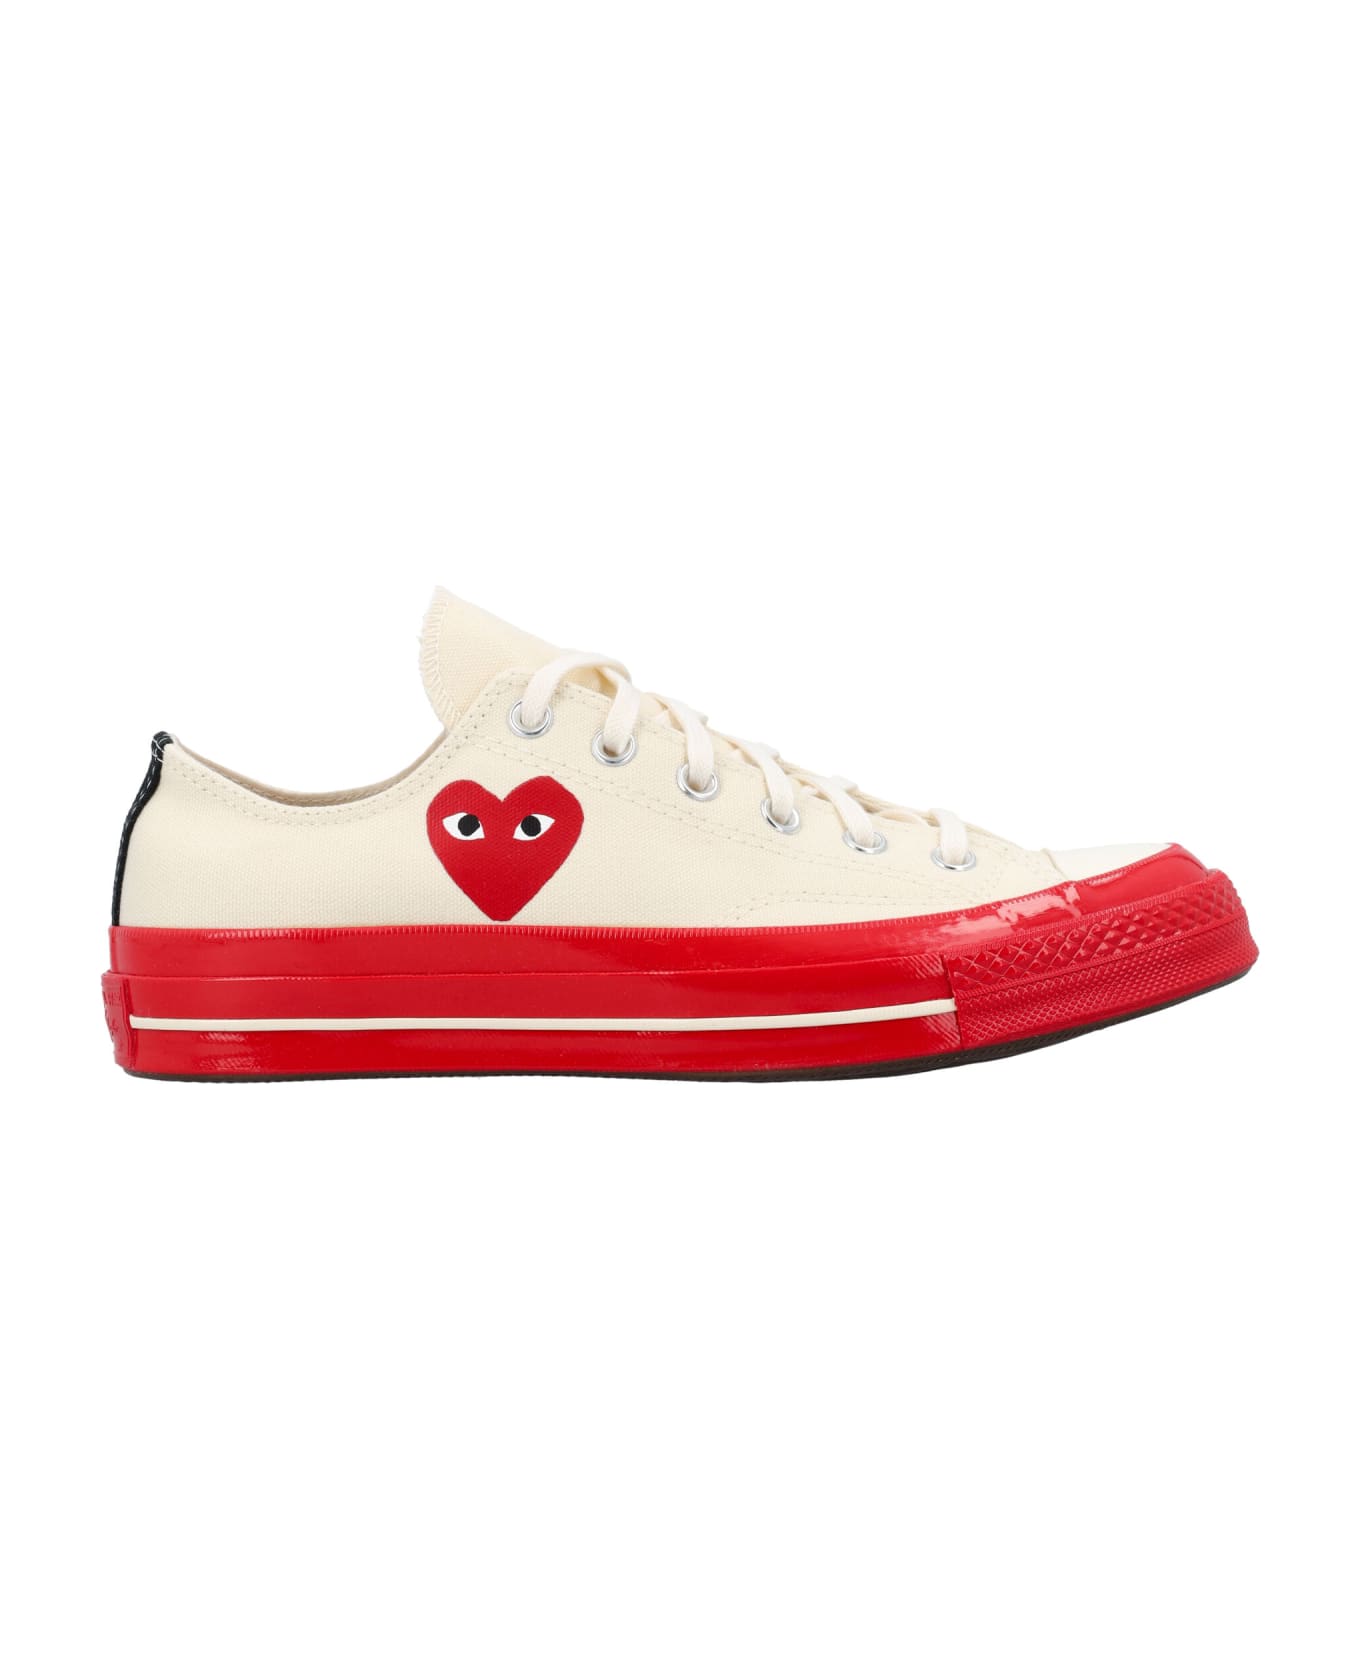 Comme des Garçons Chuck 70 Low-top Red Sole Sneakers - OFF WHITE